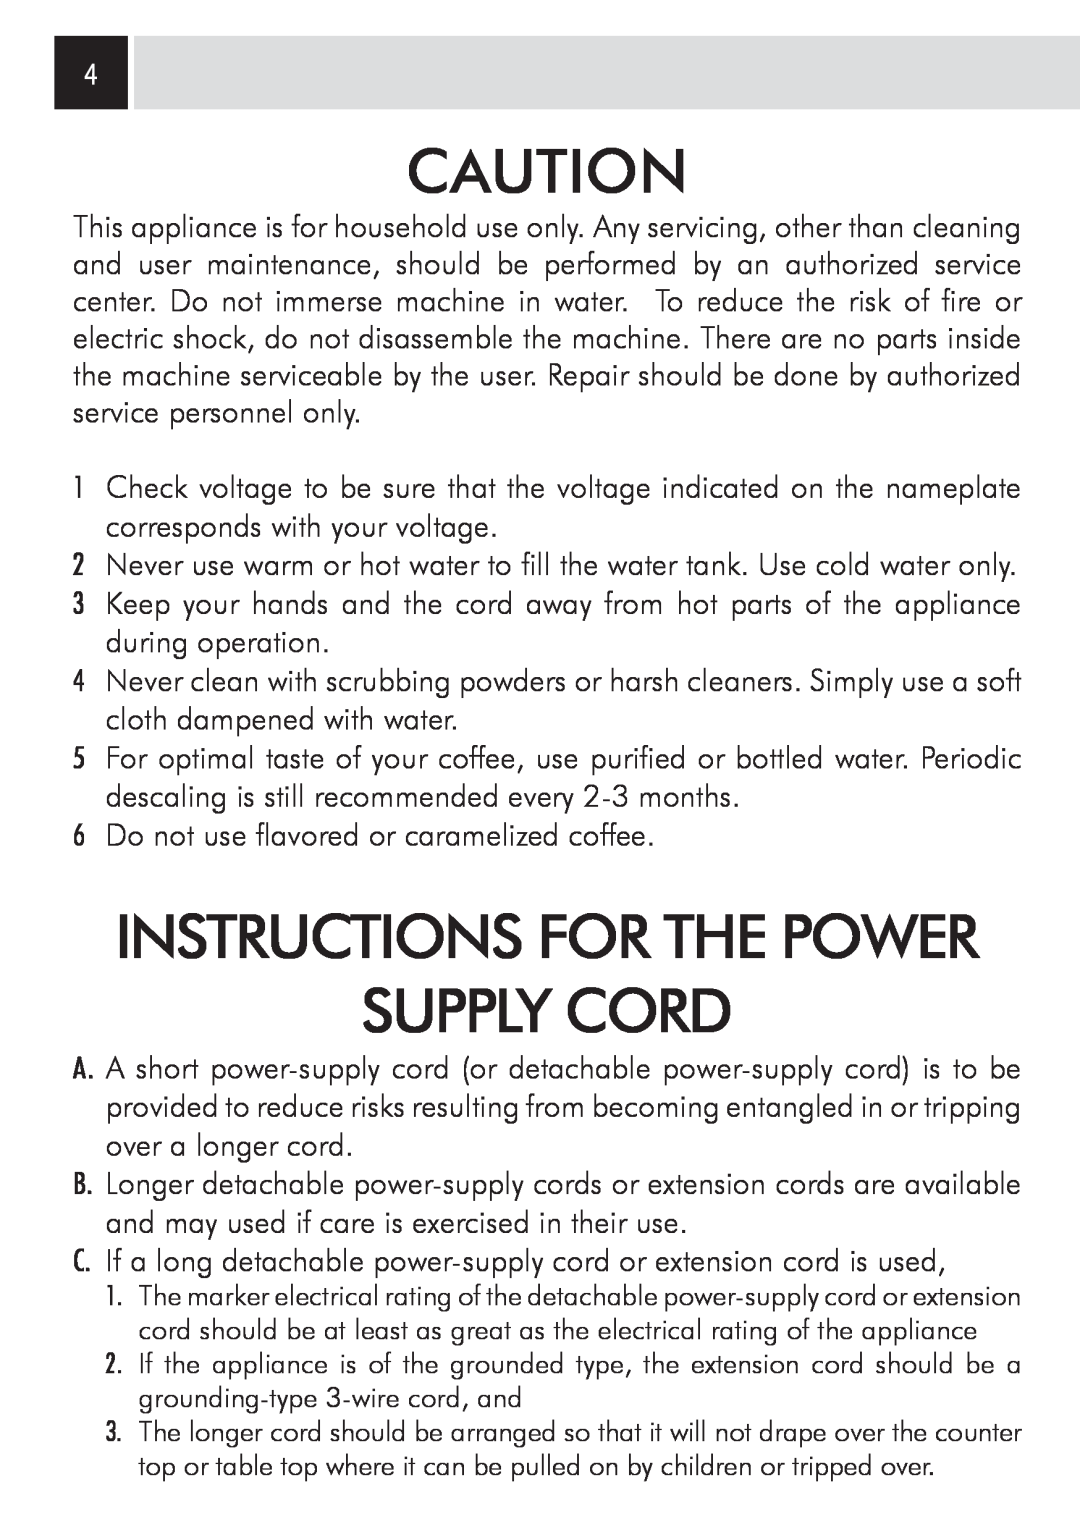 Saeco Coffee Makers 15001566, SUP032OR manual Supply Cord, Instructions For The Power 